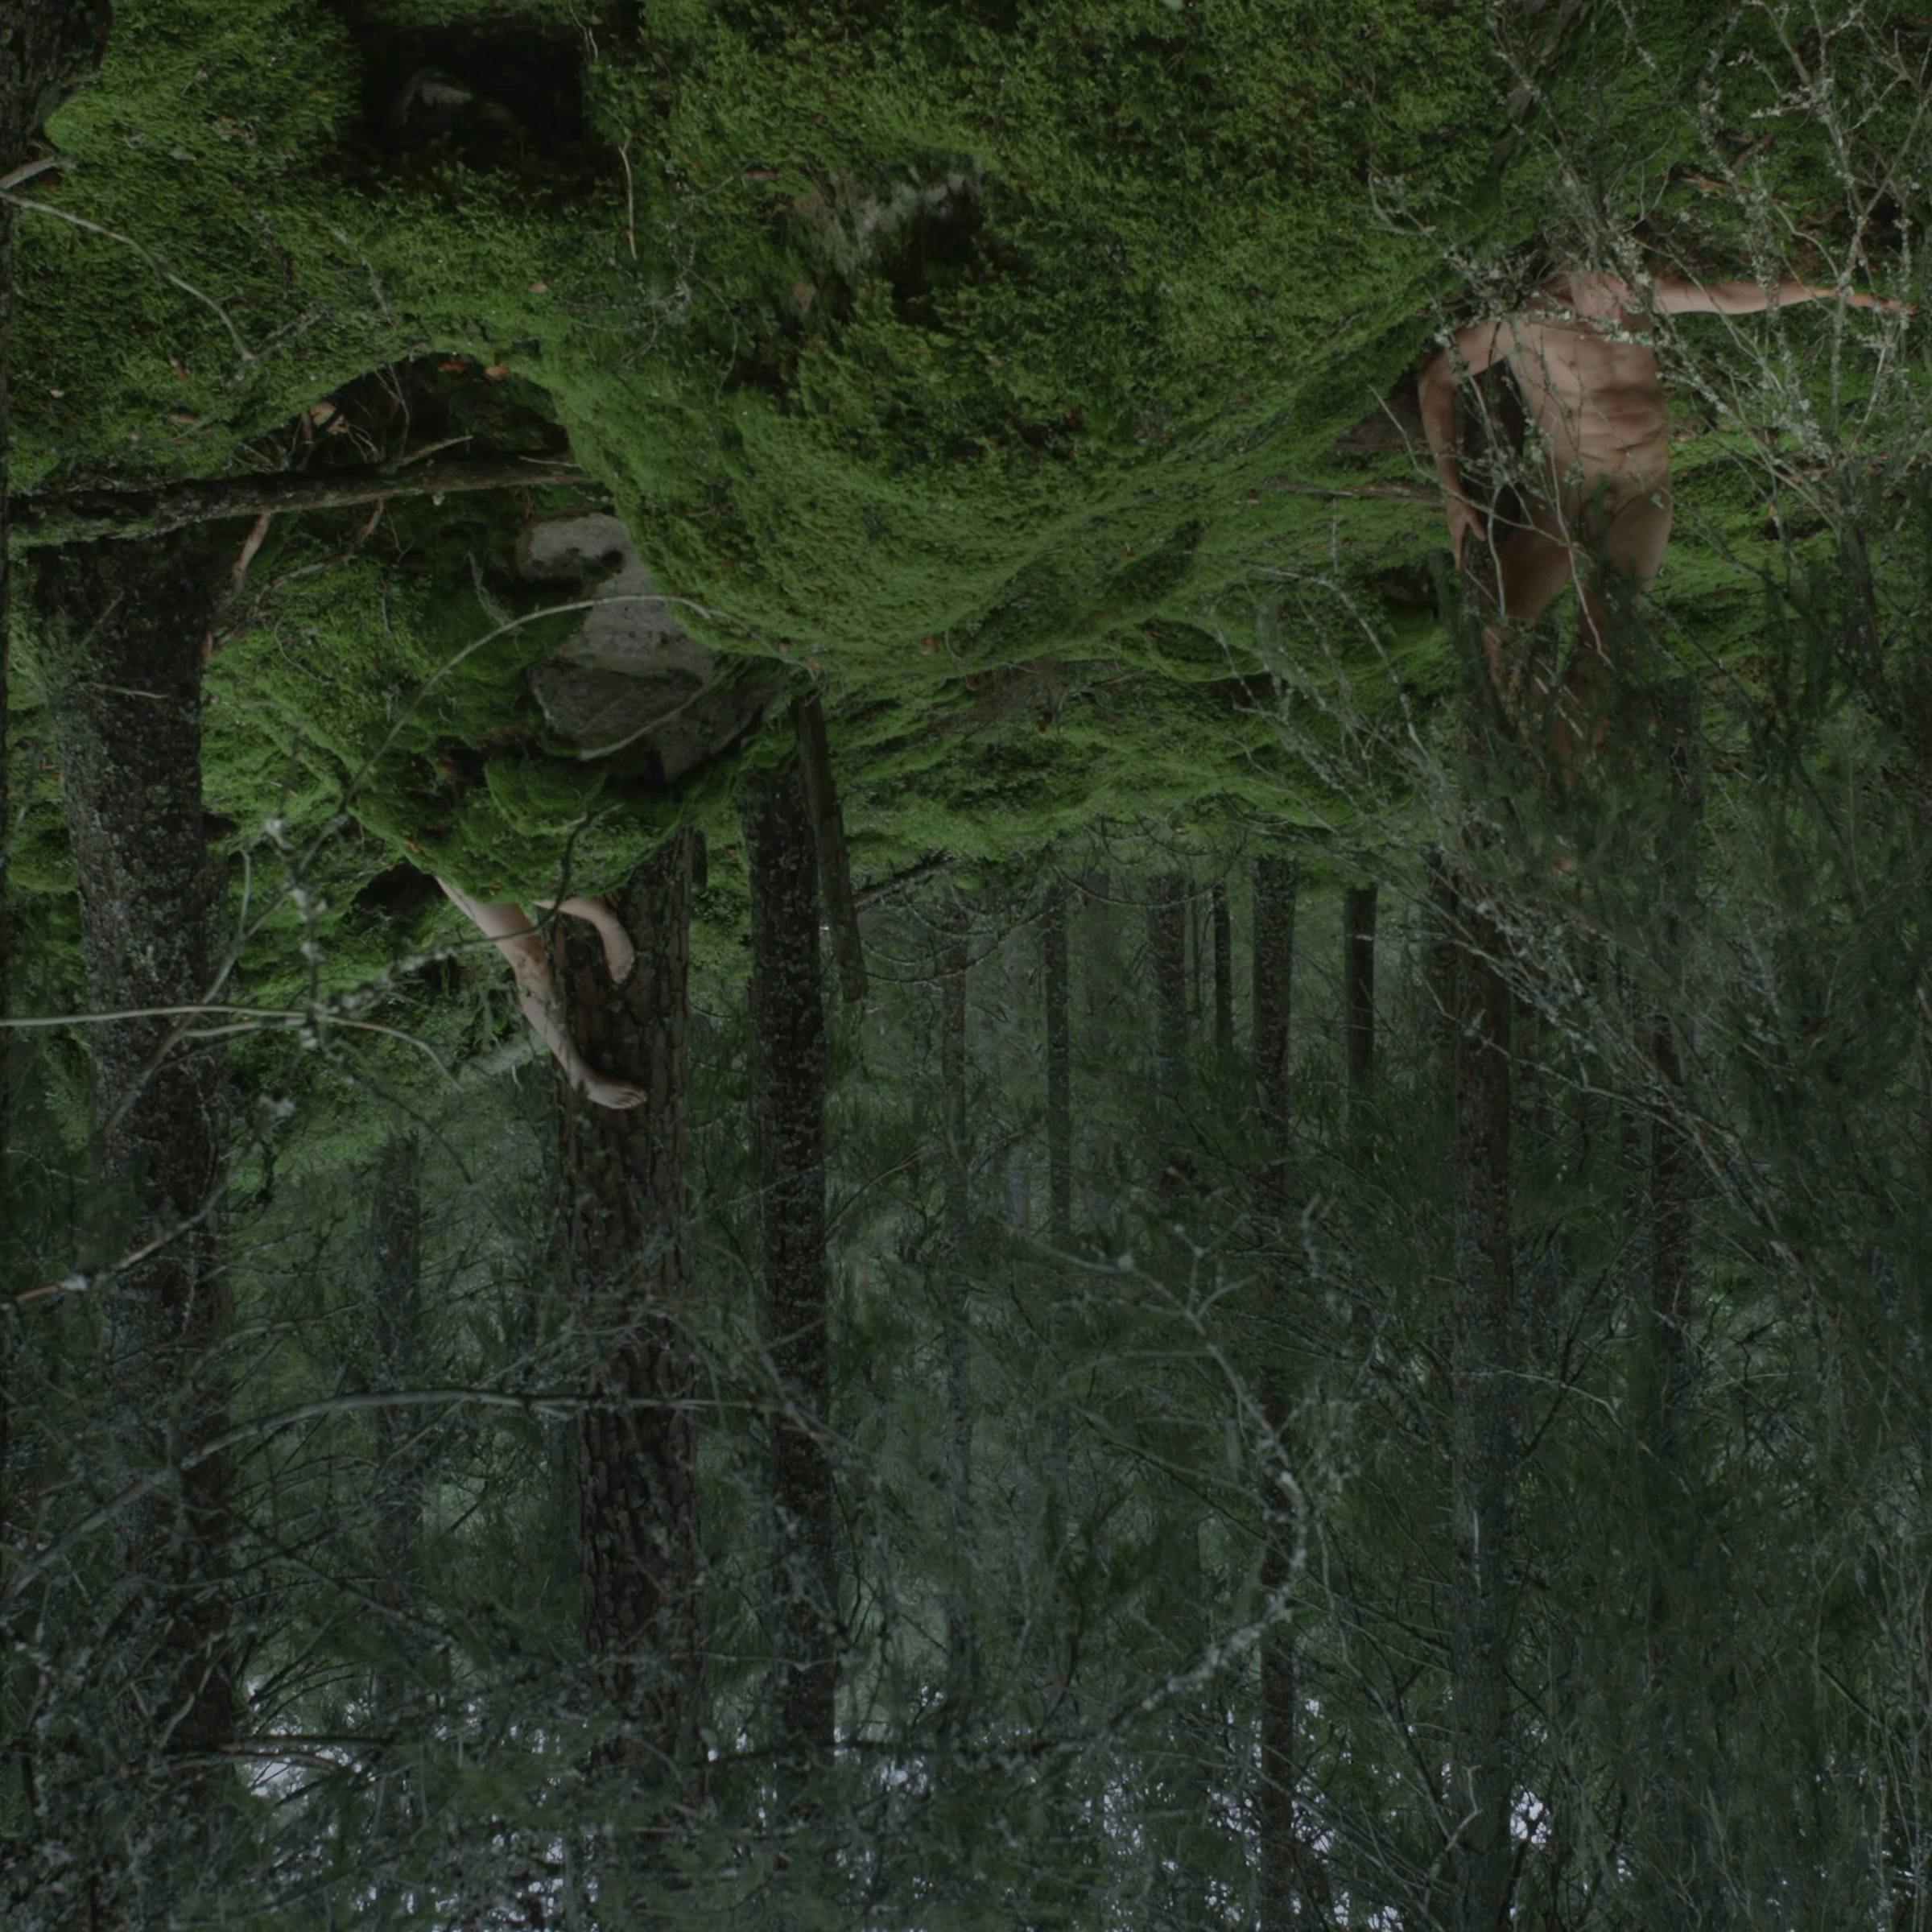 an upside down image of a lush forest. We can see one naked person in the distance